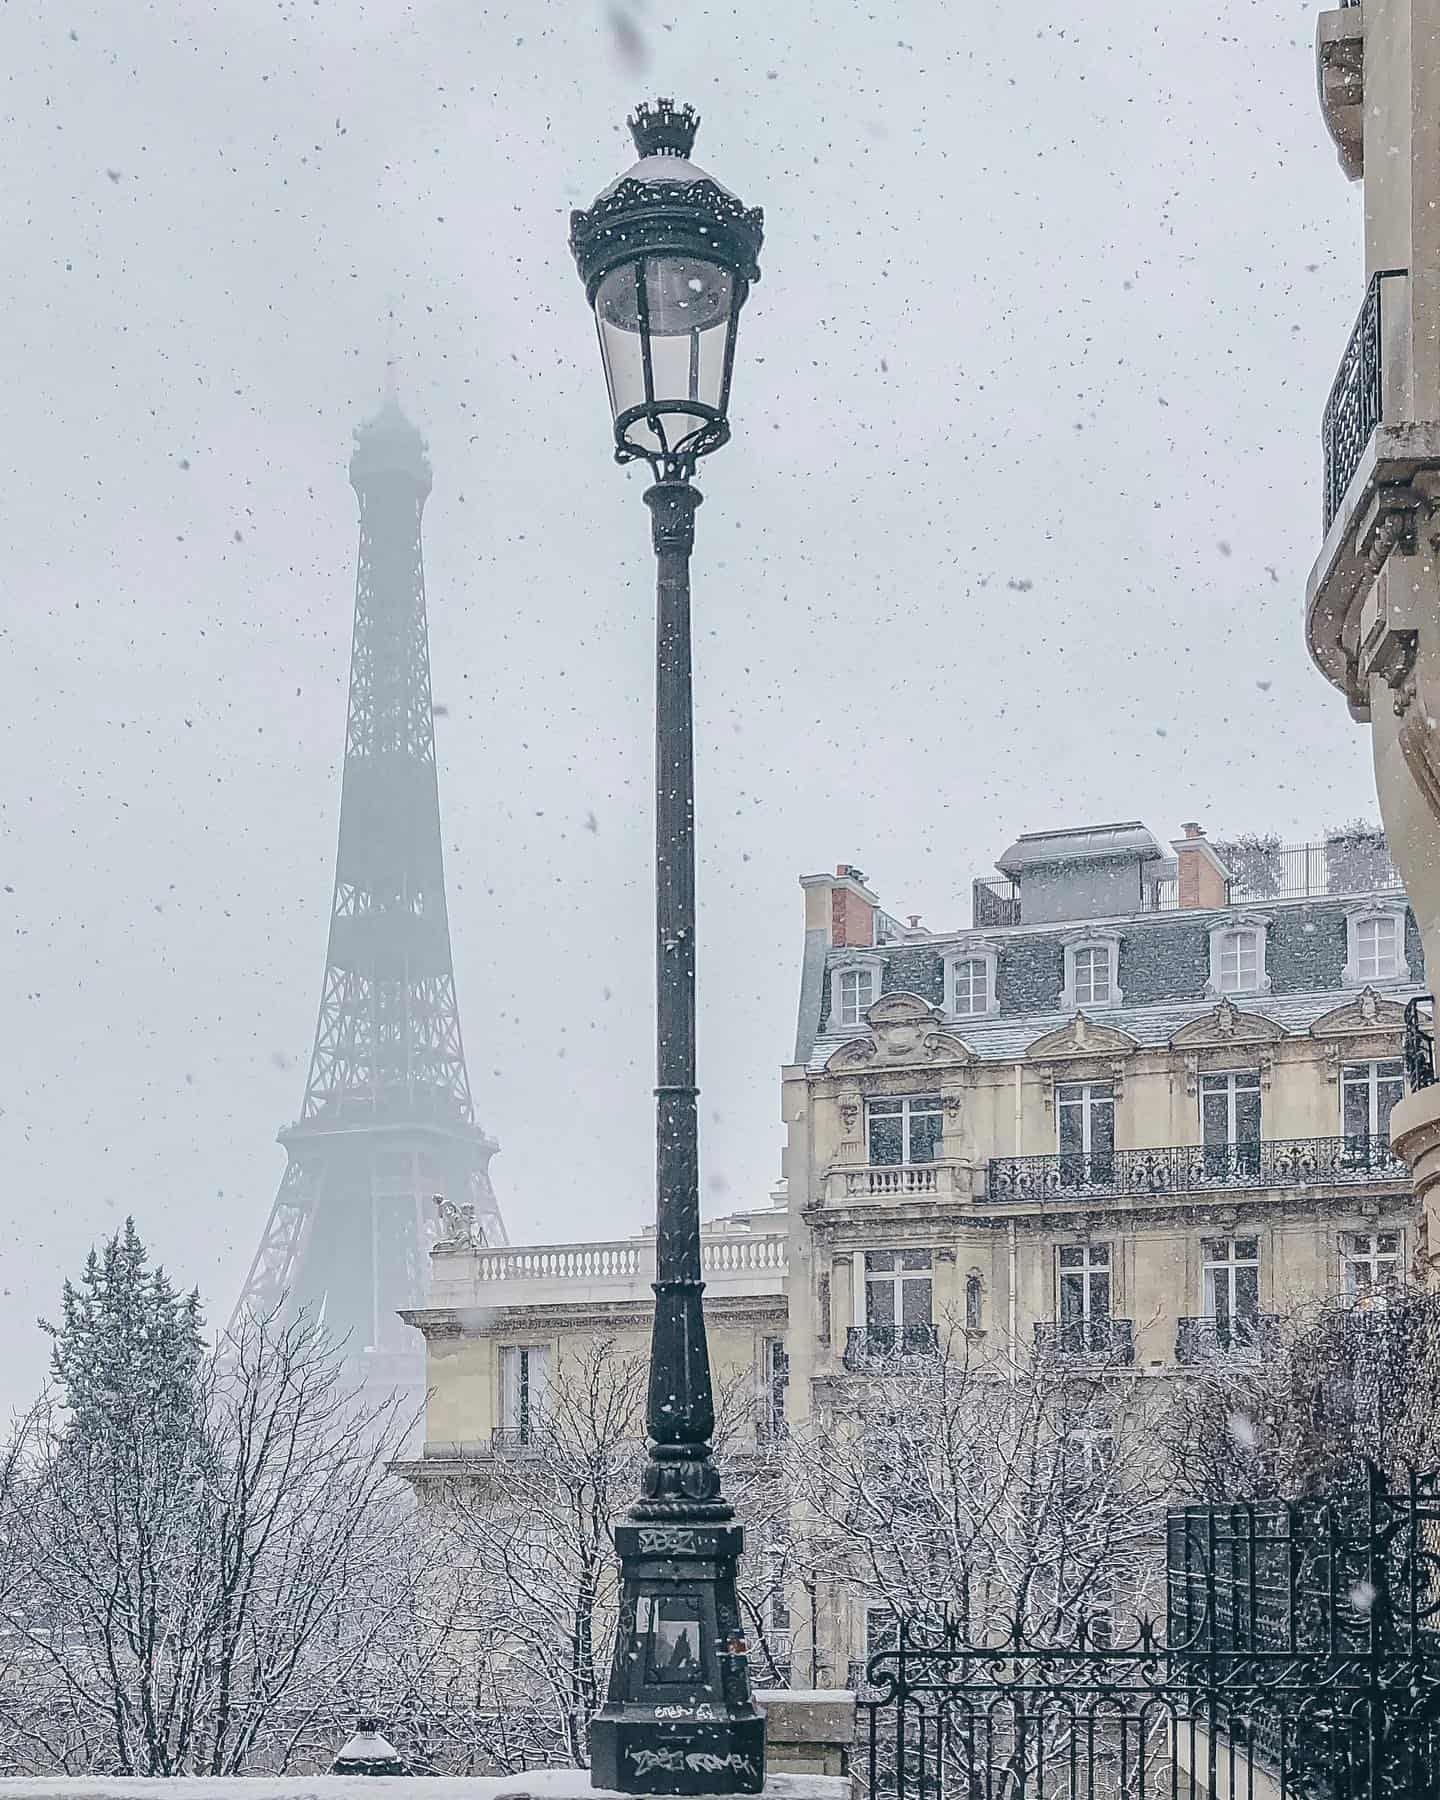 Snowing in Paris at the Eiffel Tower